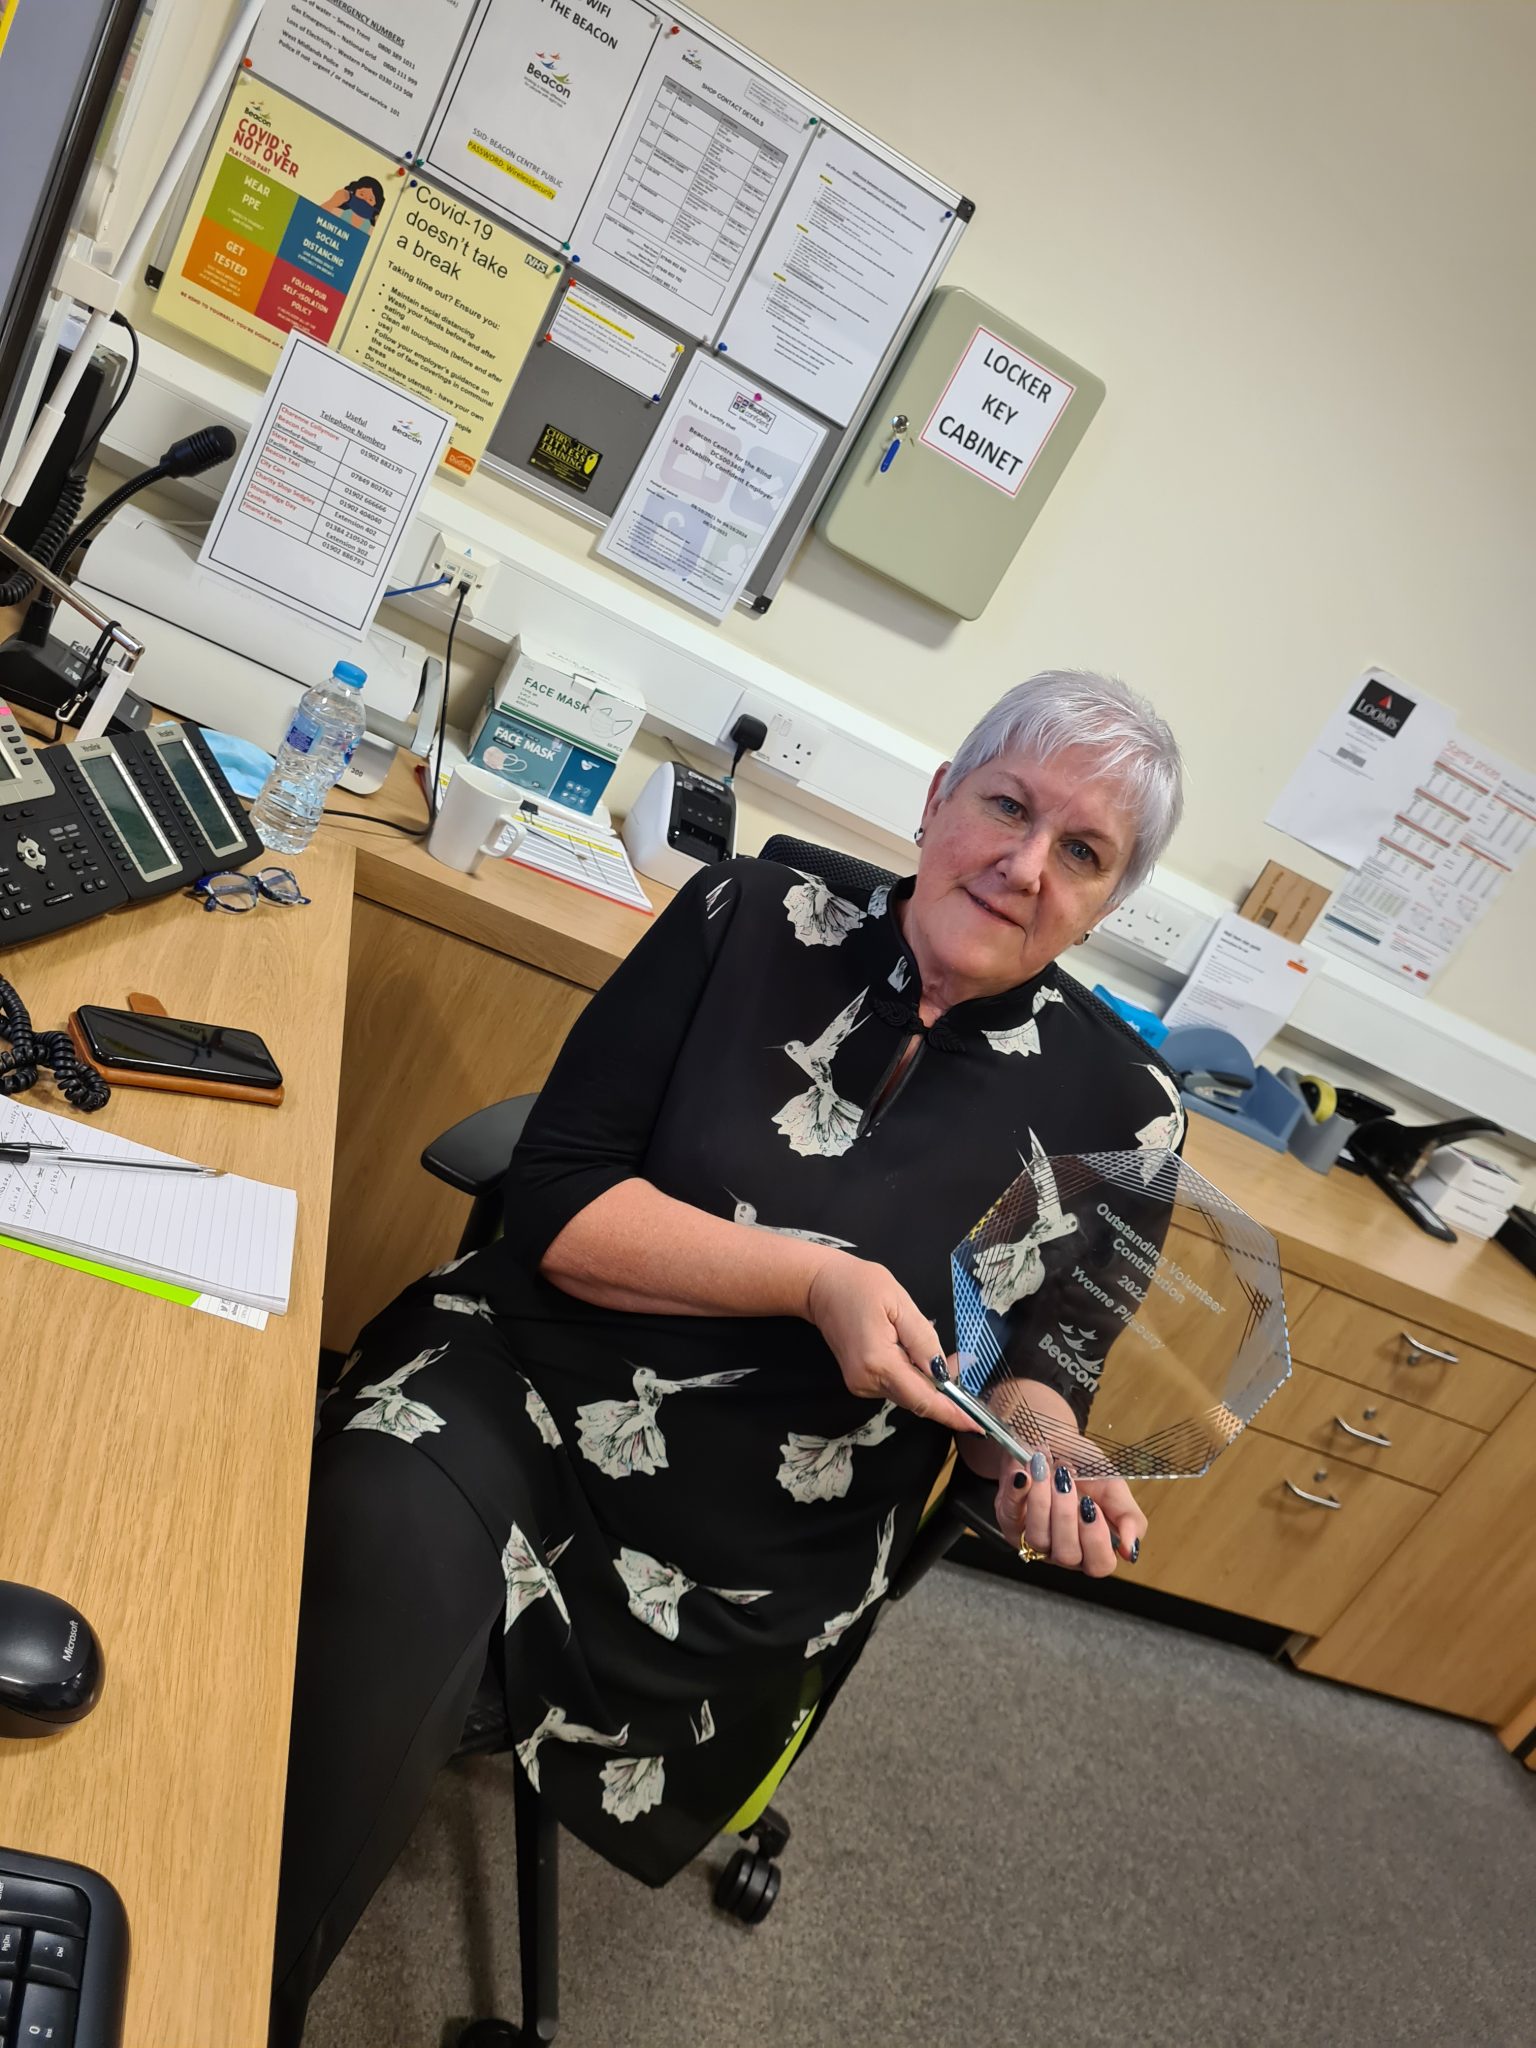 This shows Yvonne sat at her desk in Beacon's reception area. She has short hair and is dressed all in black with a tunic style top that has large grey flowers. She's holding her award, made of glass in a hexagon shape and is smiling towards the camera. 